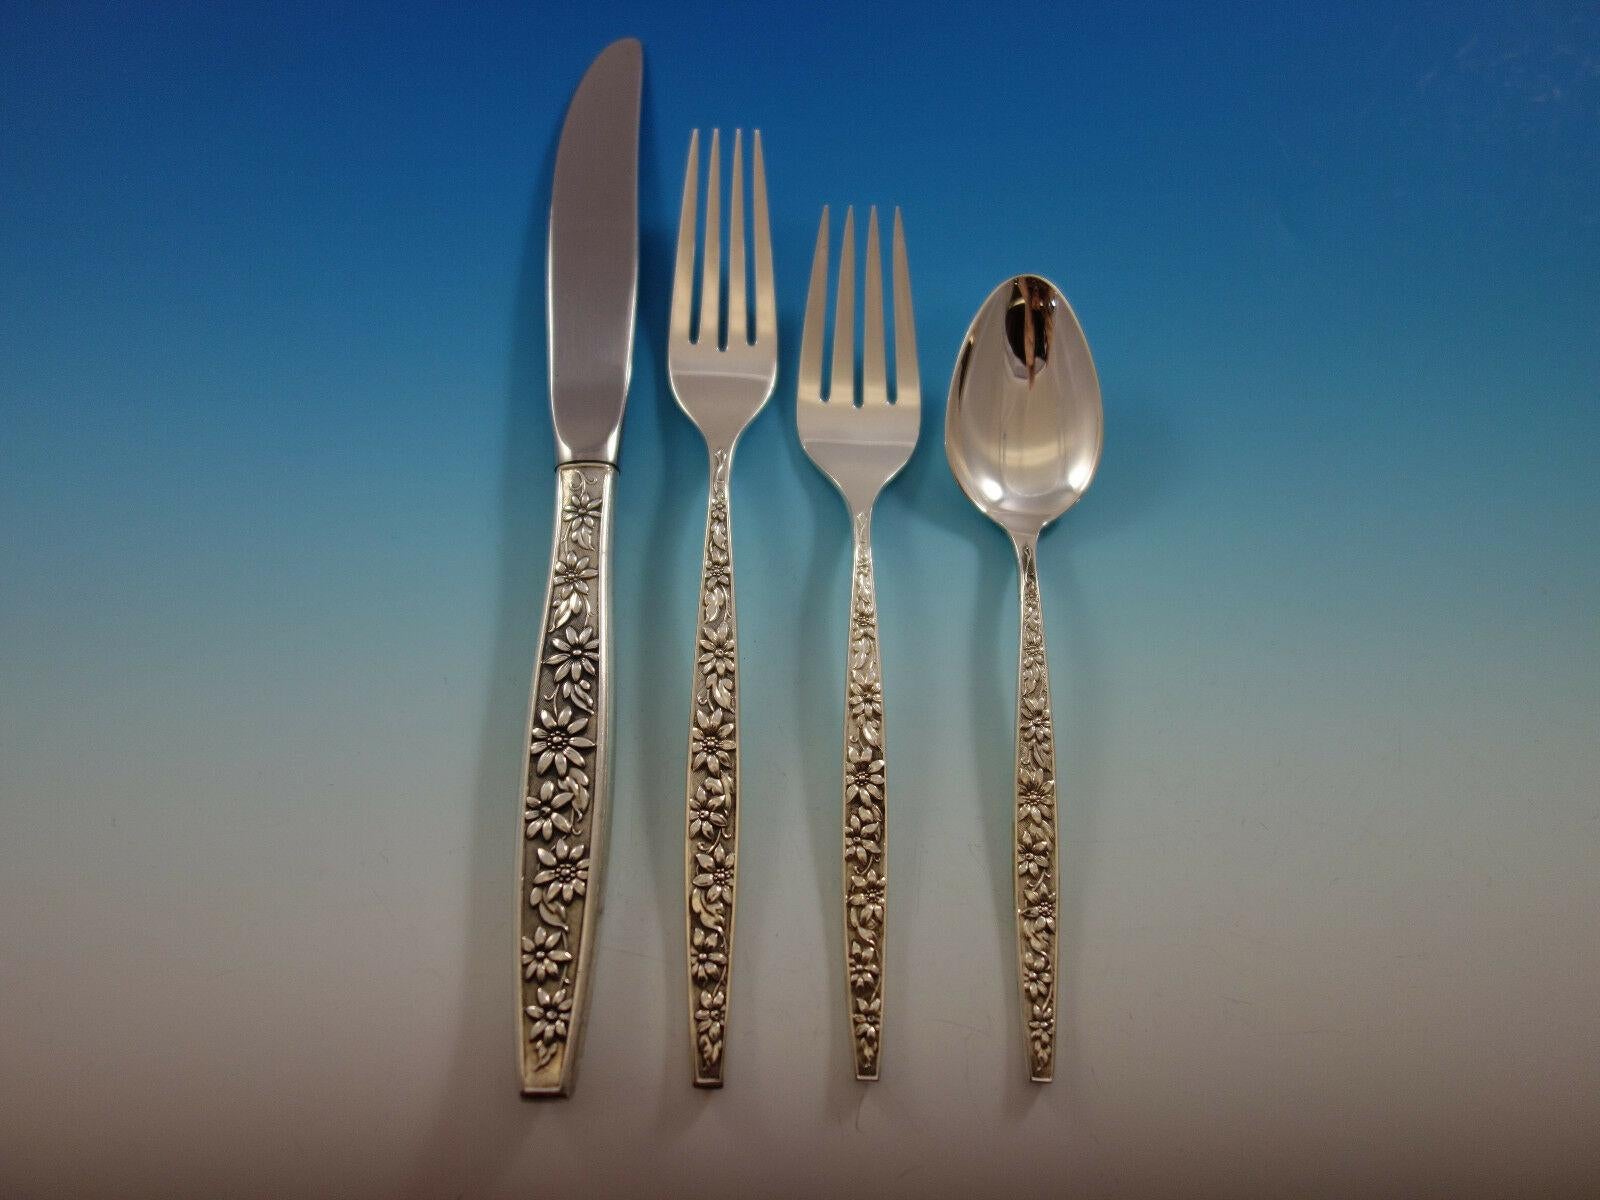 Lovely Meadow Song by Towle Sterling silver flatware set - 48 pieces. This set includes:

8 knives, 9 1/8